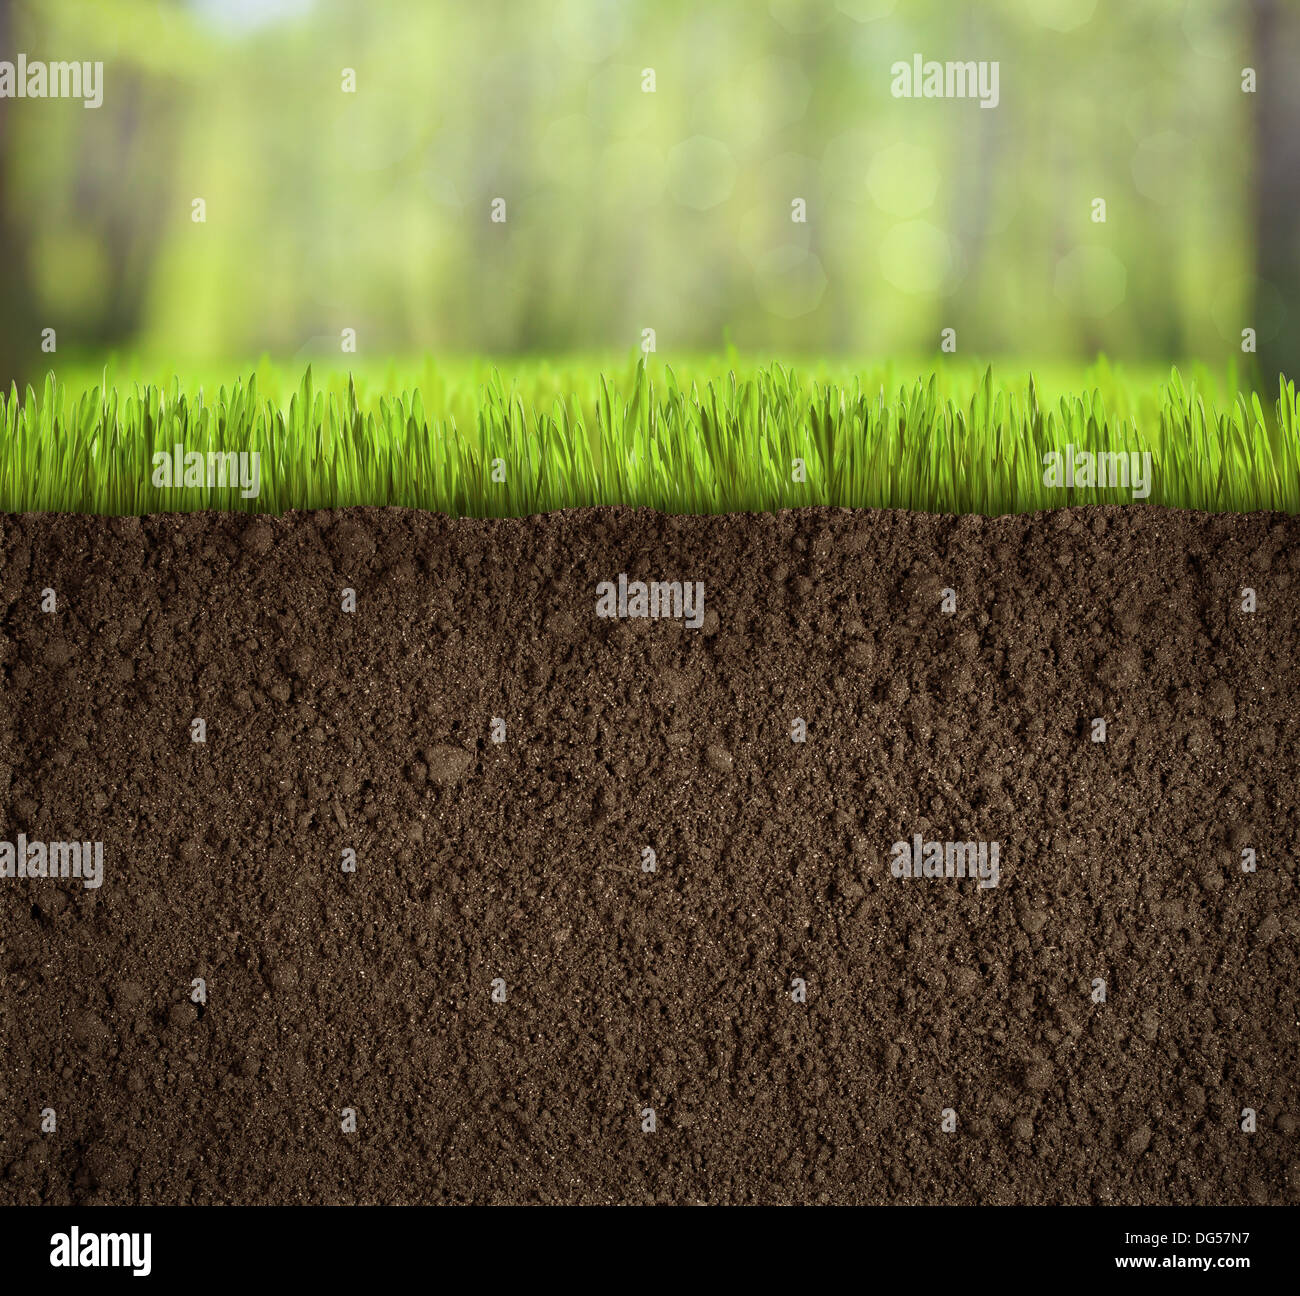 soil under grass in forest Stock Photo